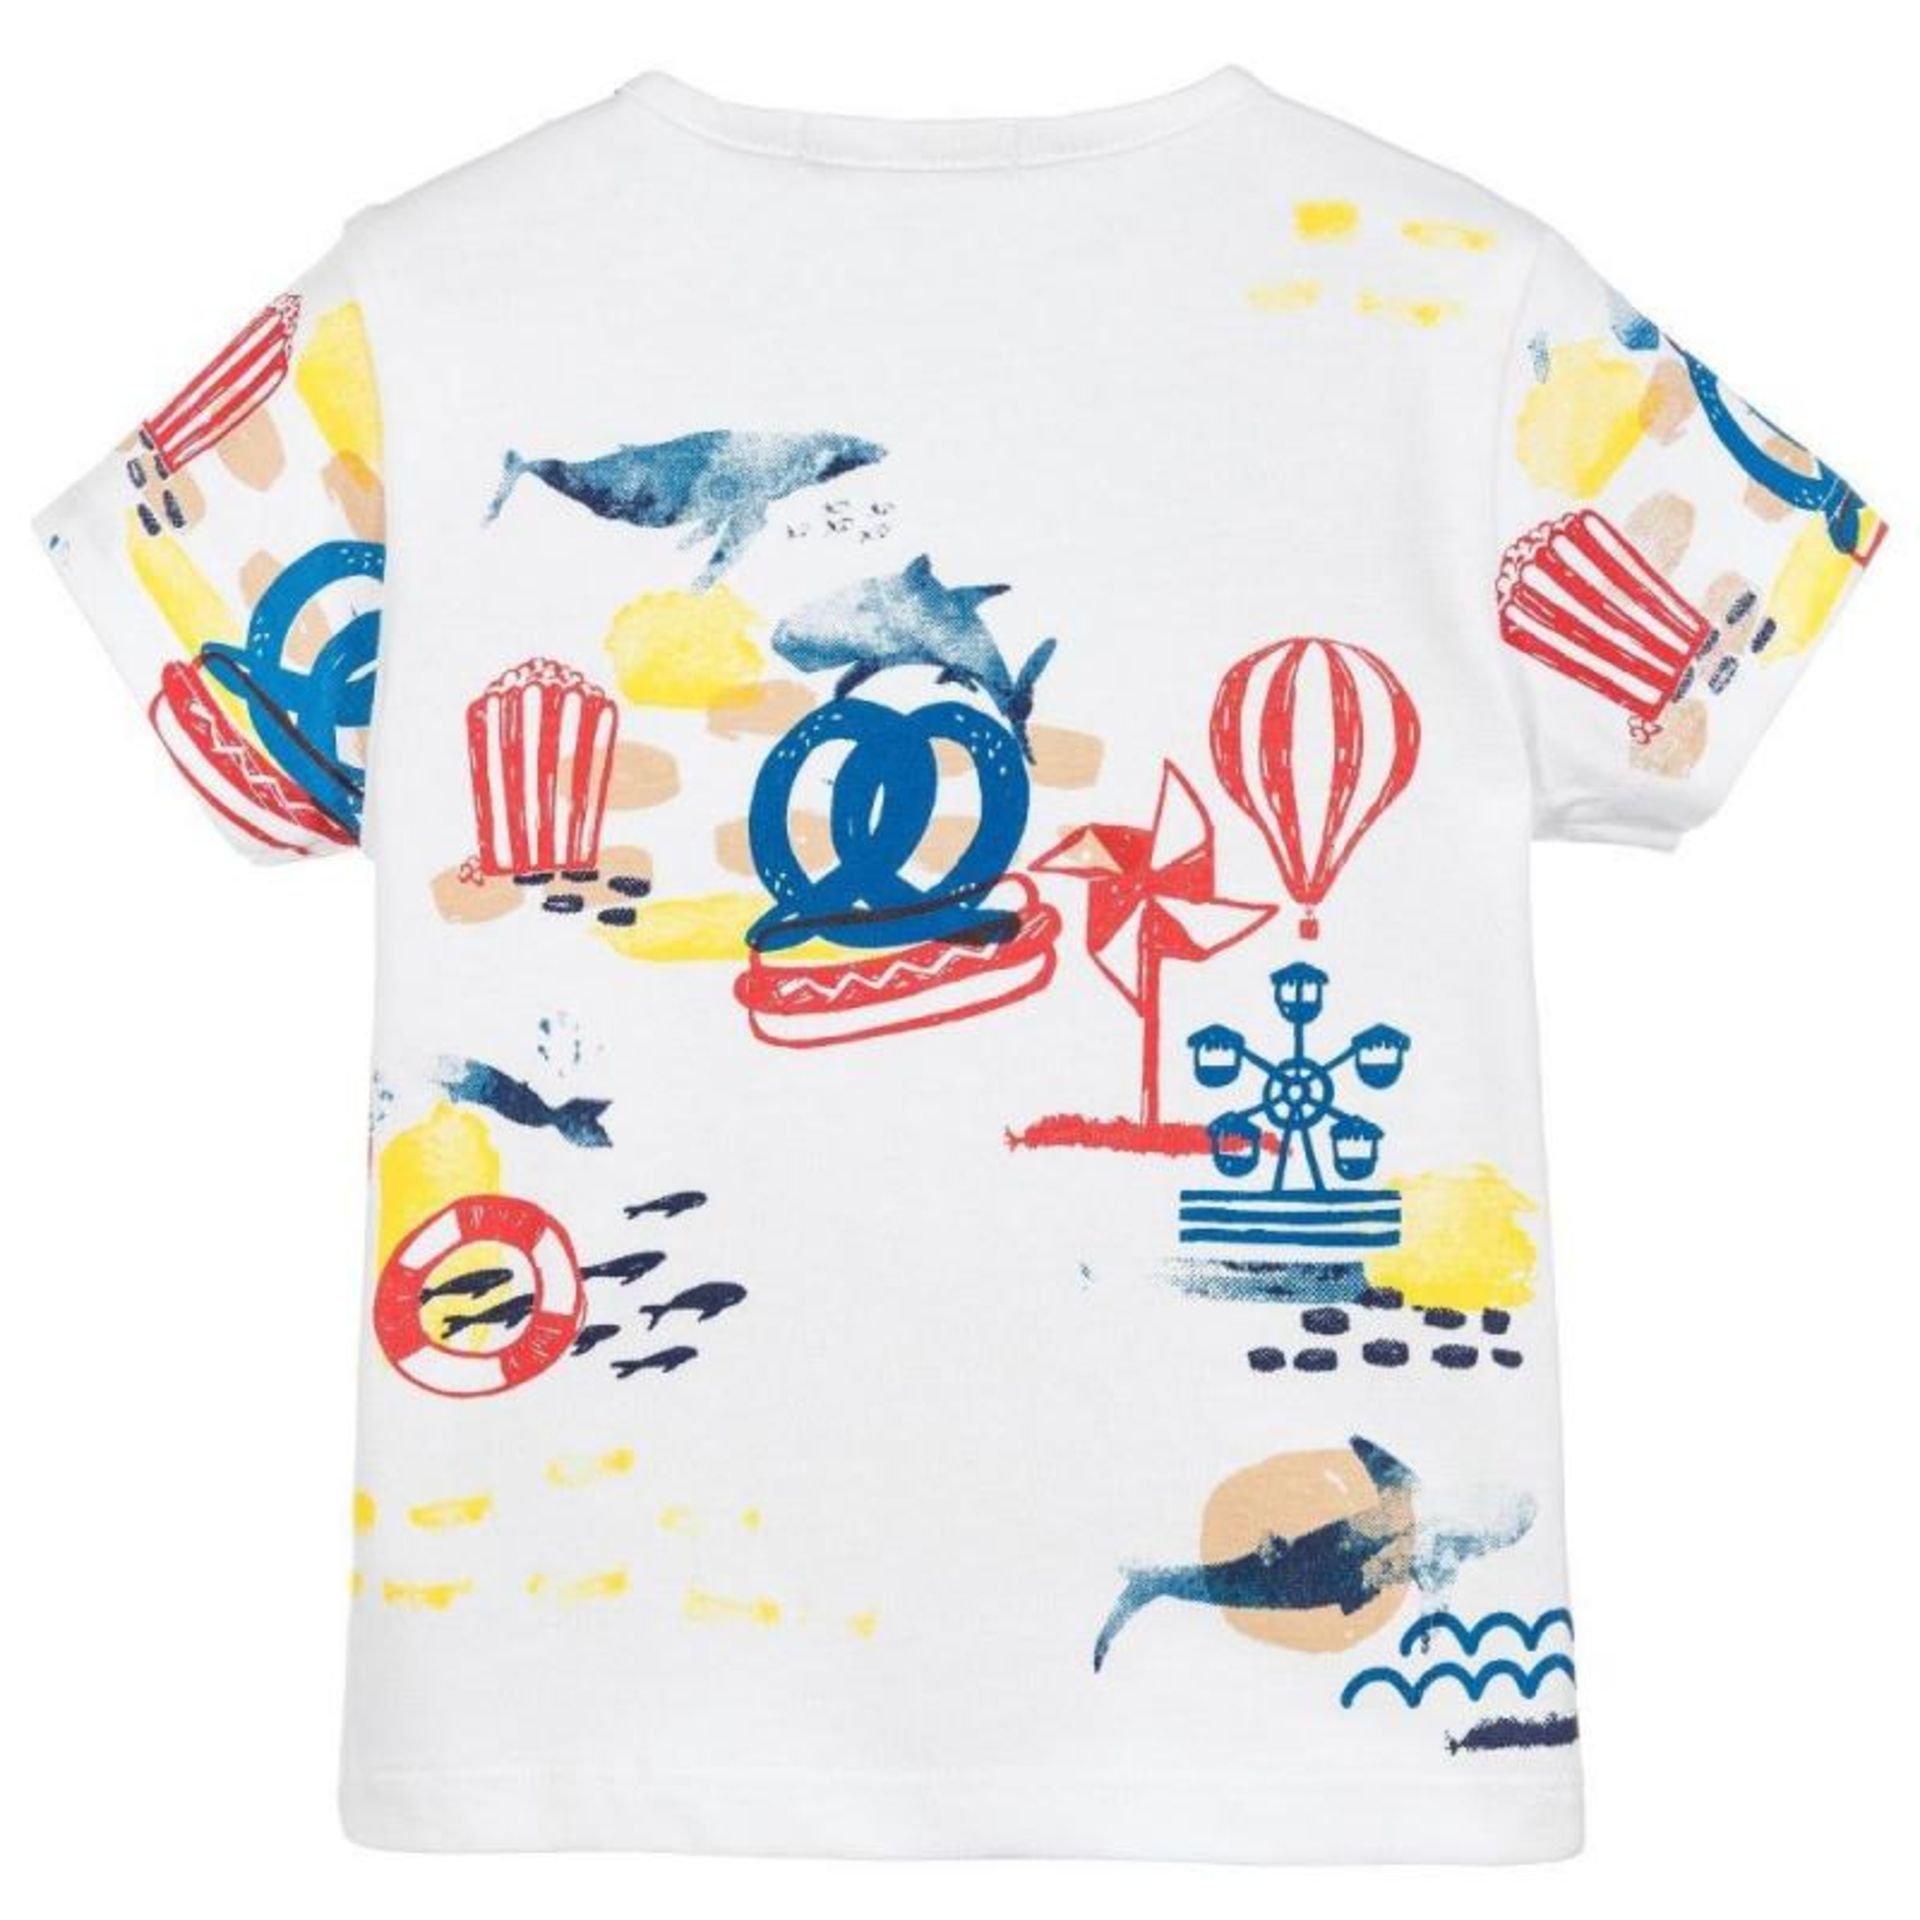 1 x BILLYBANDIT T-Shirt S/Sleeve - New With Tags - Size: 3M - Ref: V01526 - CL580 - NO VAT ON THE HA - Image 2 of 2